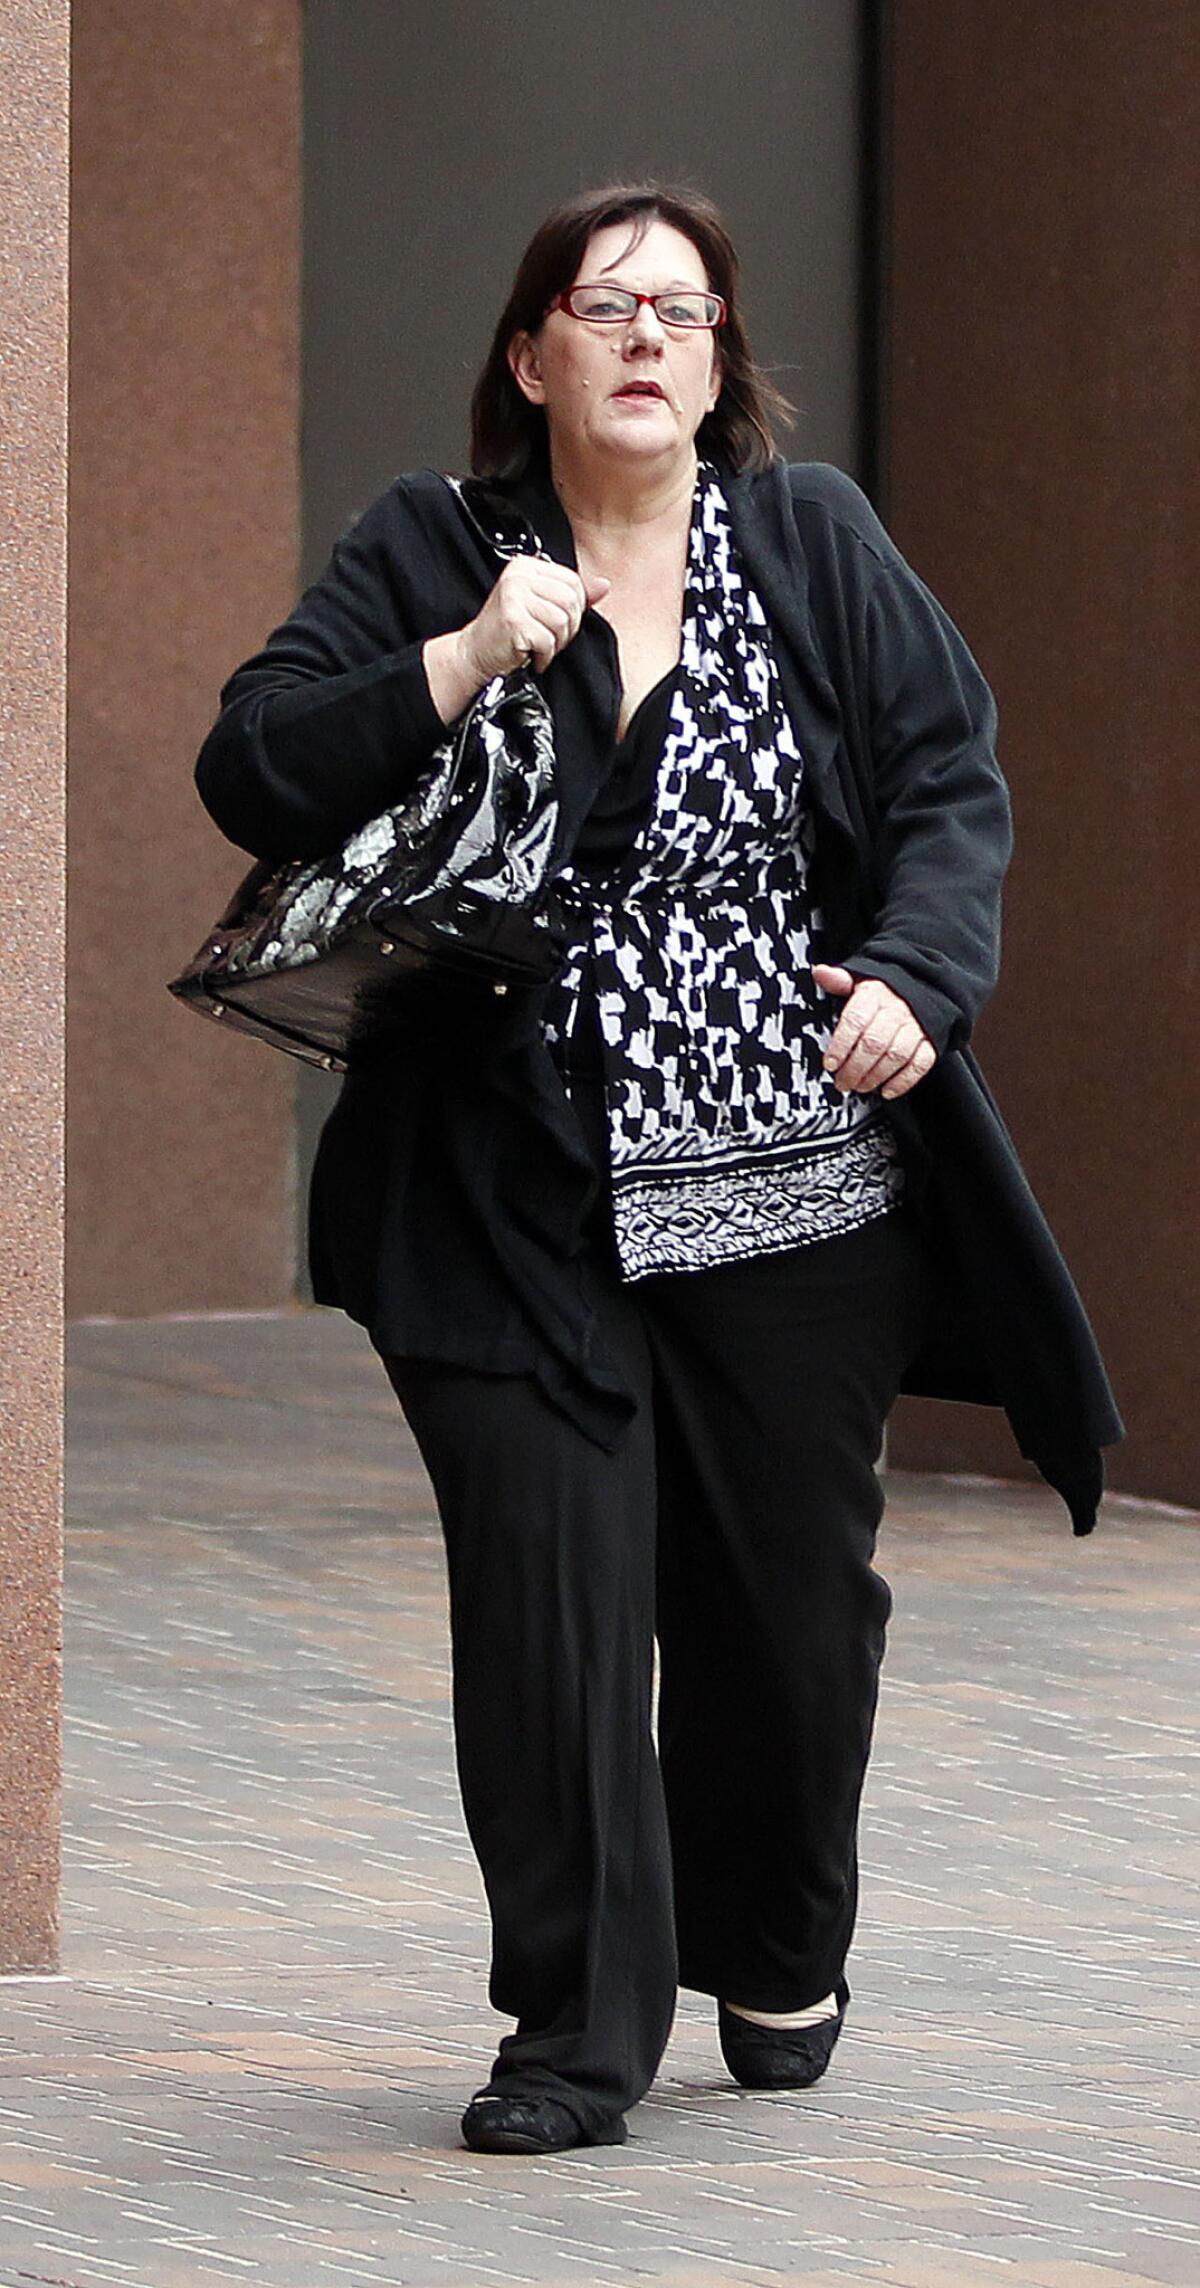 Carla Chambers arrives in San Diego federal court in 2012 during a baby-selling case. Tuesday, she was sentenced for running an unlicensed puppy mill.